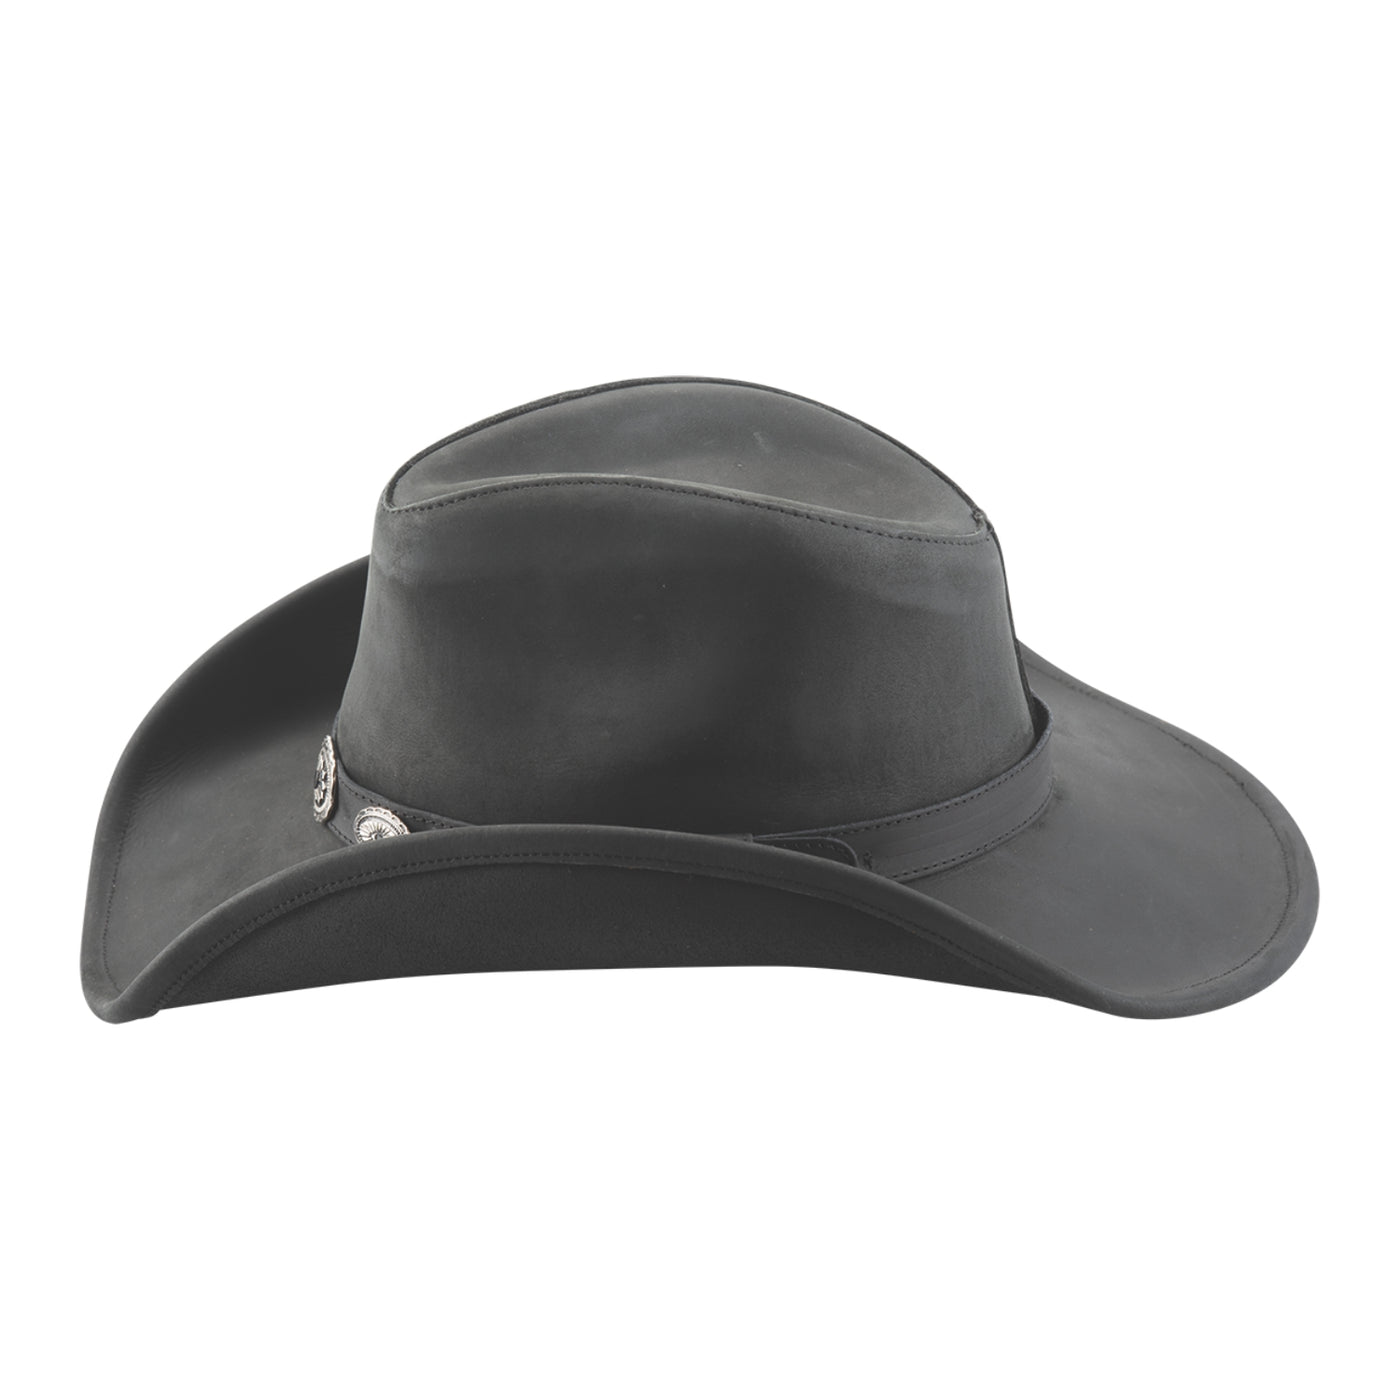 This leather Western style hat is made from top grain black leather. The brim is 3 3/8" wide and has metal sewn into the edge for easy shaping.  Take yourself back to Tombstone, Deadwood or Dodge with the classic pinched crown accented with small southwest inspired oval conches decorate around the rest of the hat band. Available for purchase at our retail shop in Smyrna, TN, just outside of Nashville. Available in sizes small through XL. side view